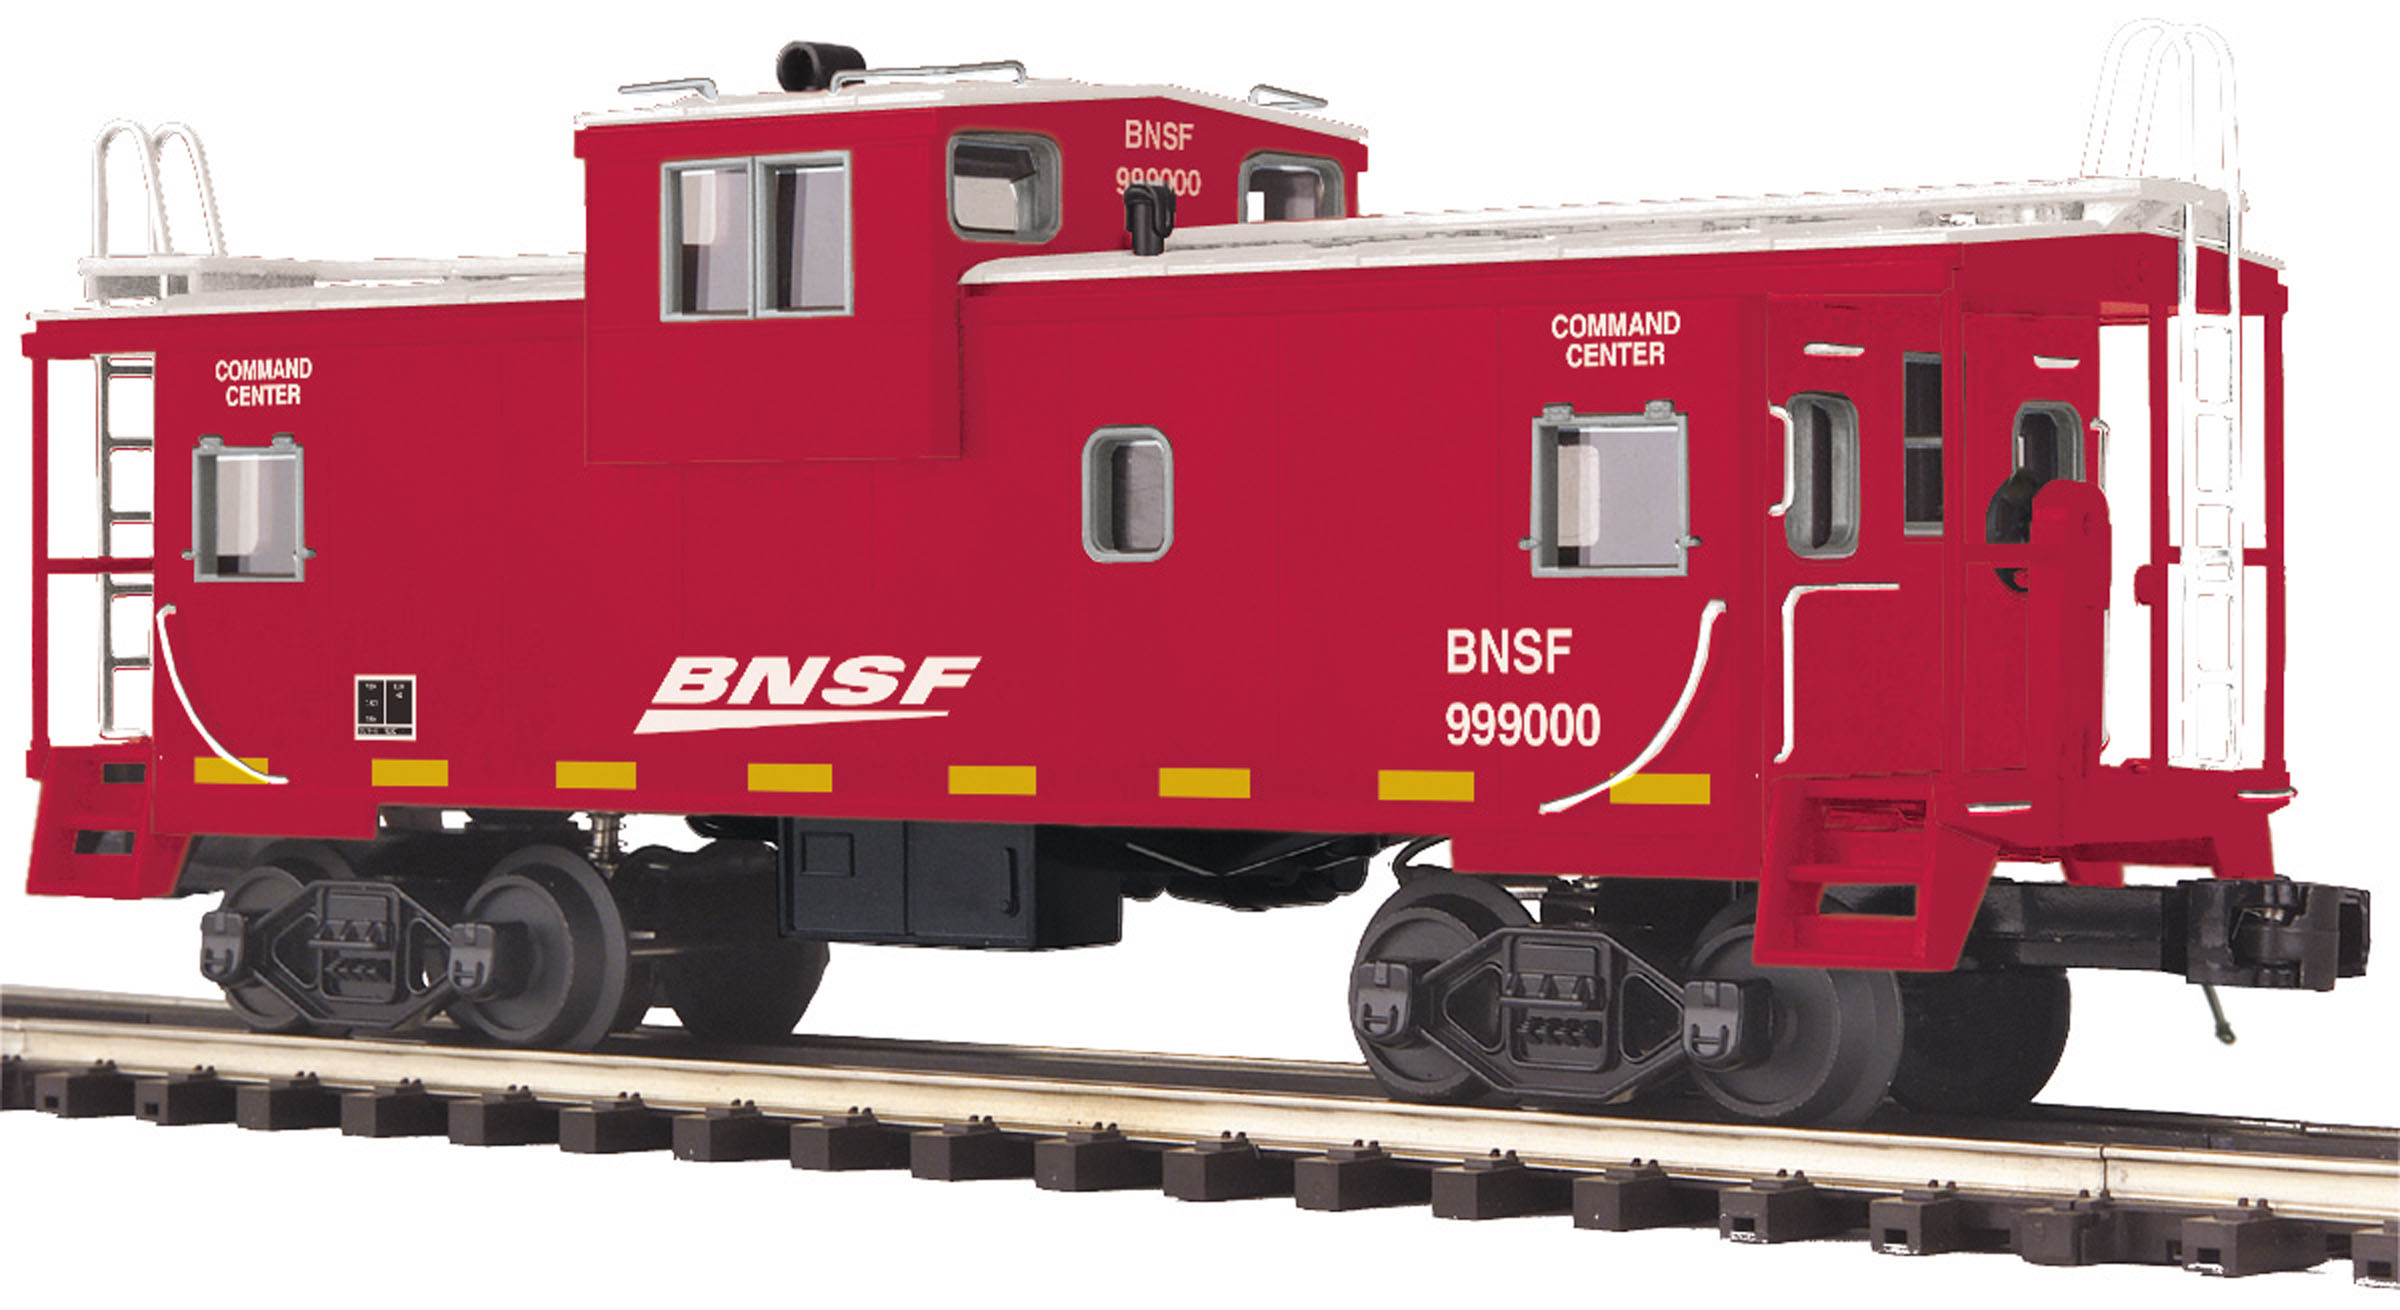 BNSF Extended Vision Caboose (Command Car for Fire Train) image